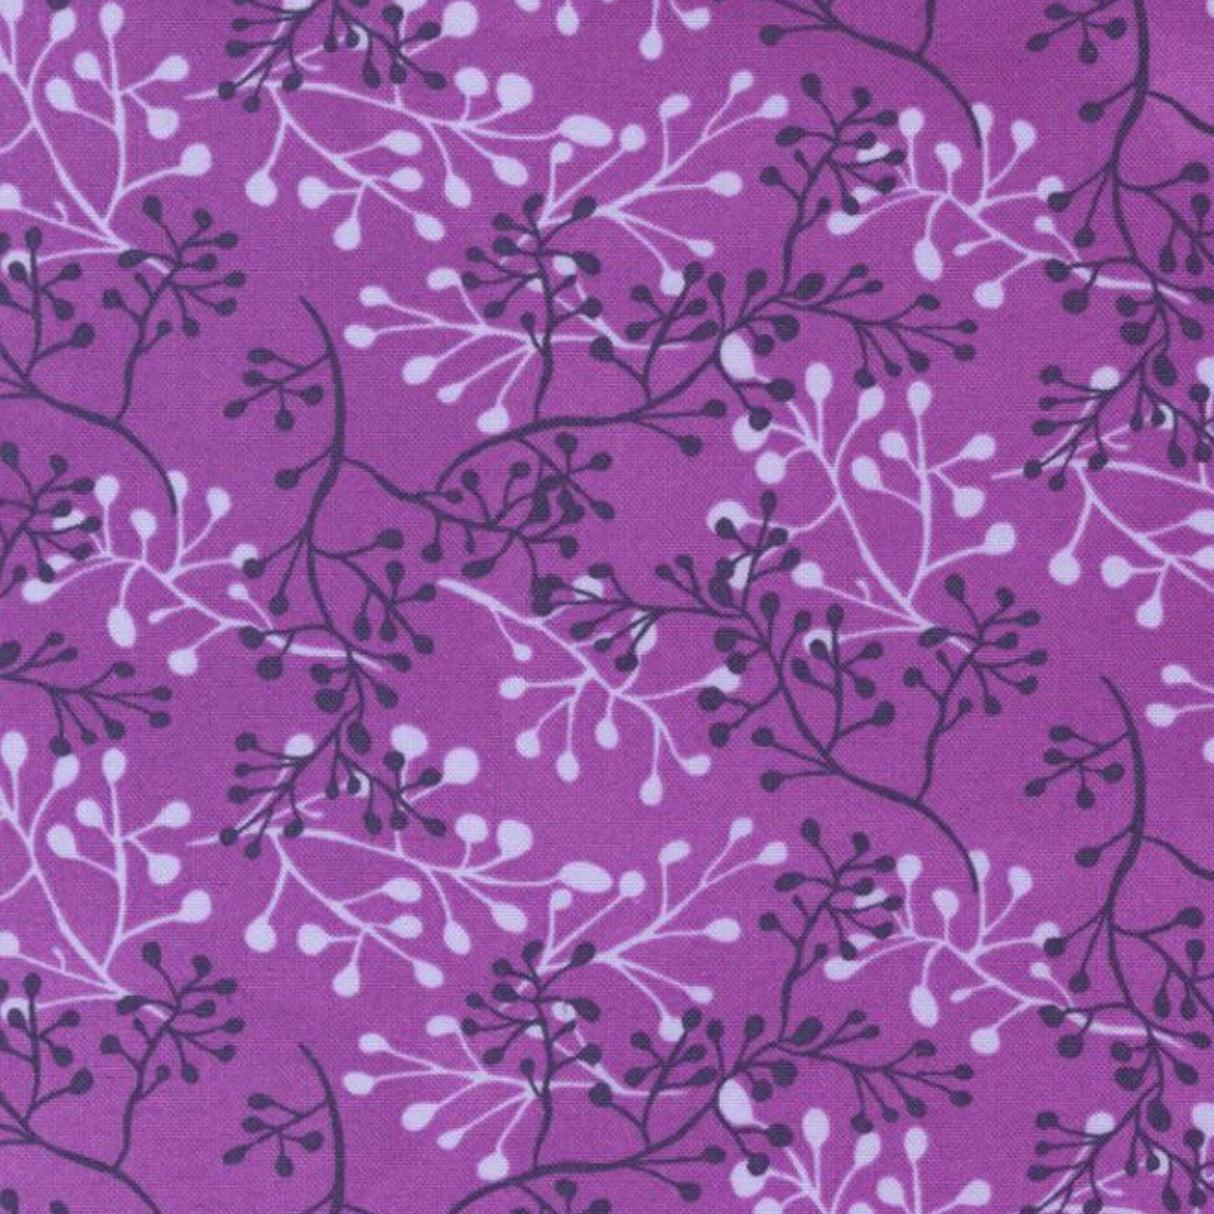 Pansys Posies Plum Spring Bunch Fabric